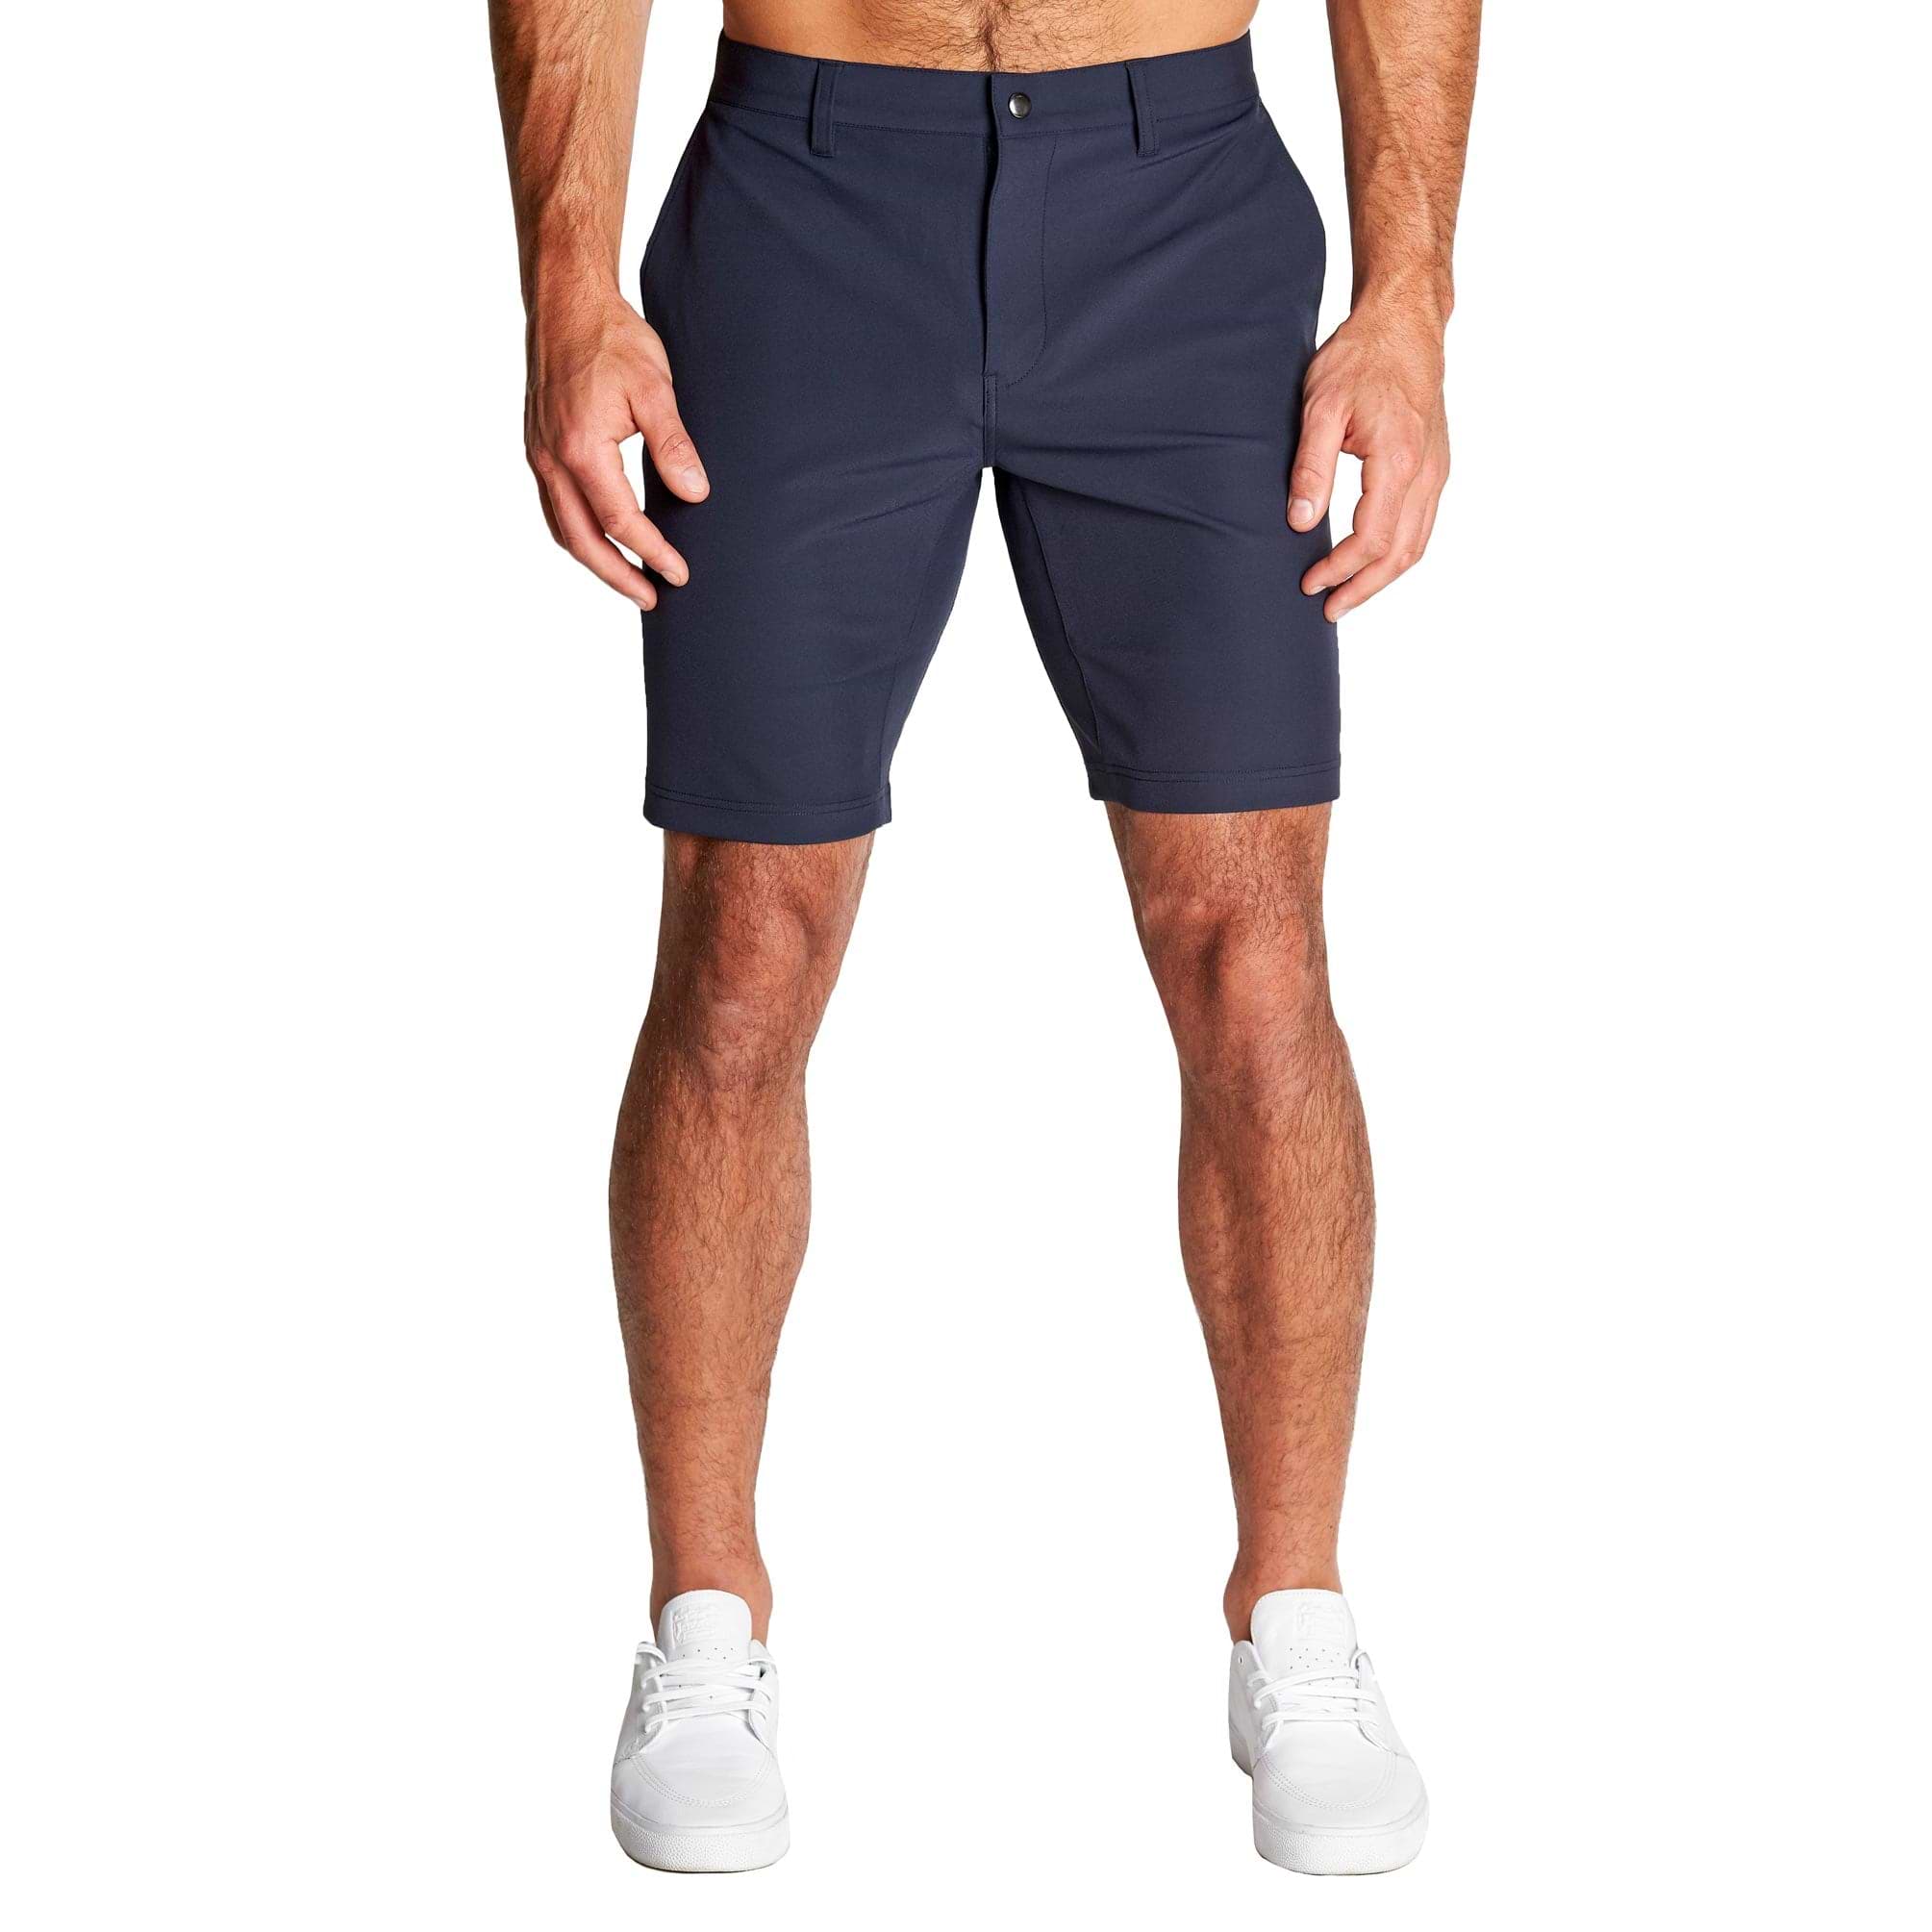 Athletic Fit Shorts - Navy